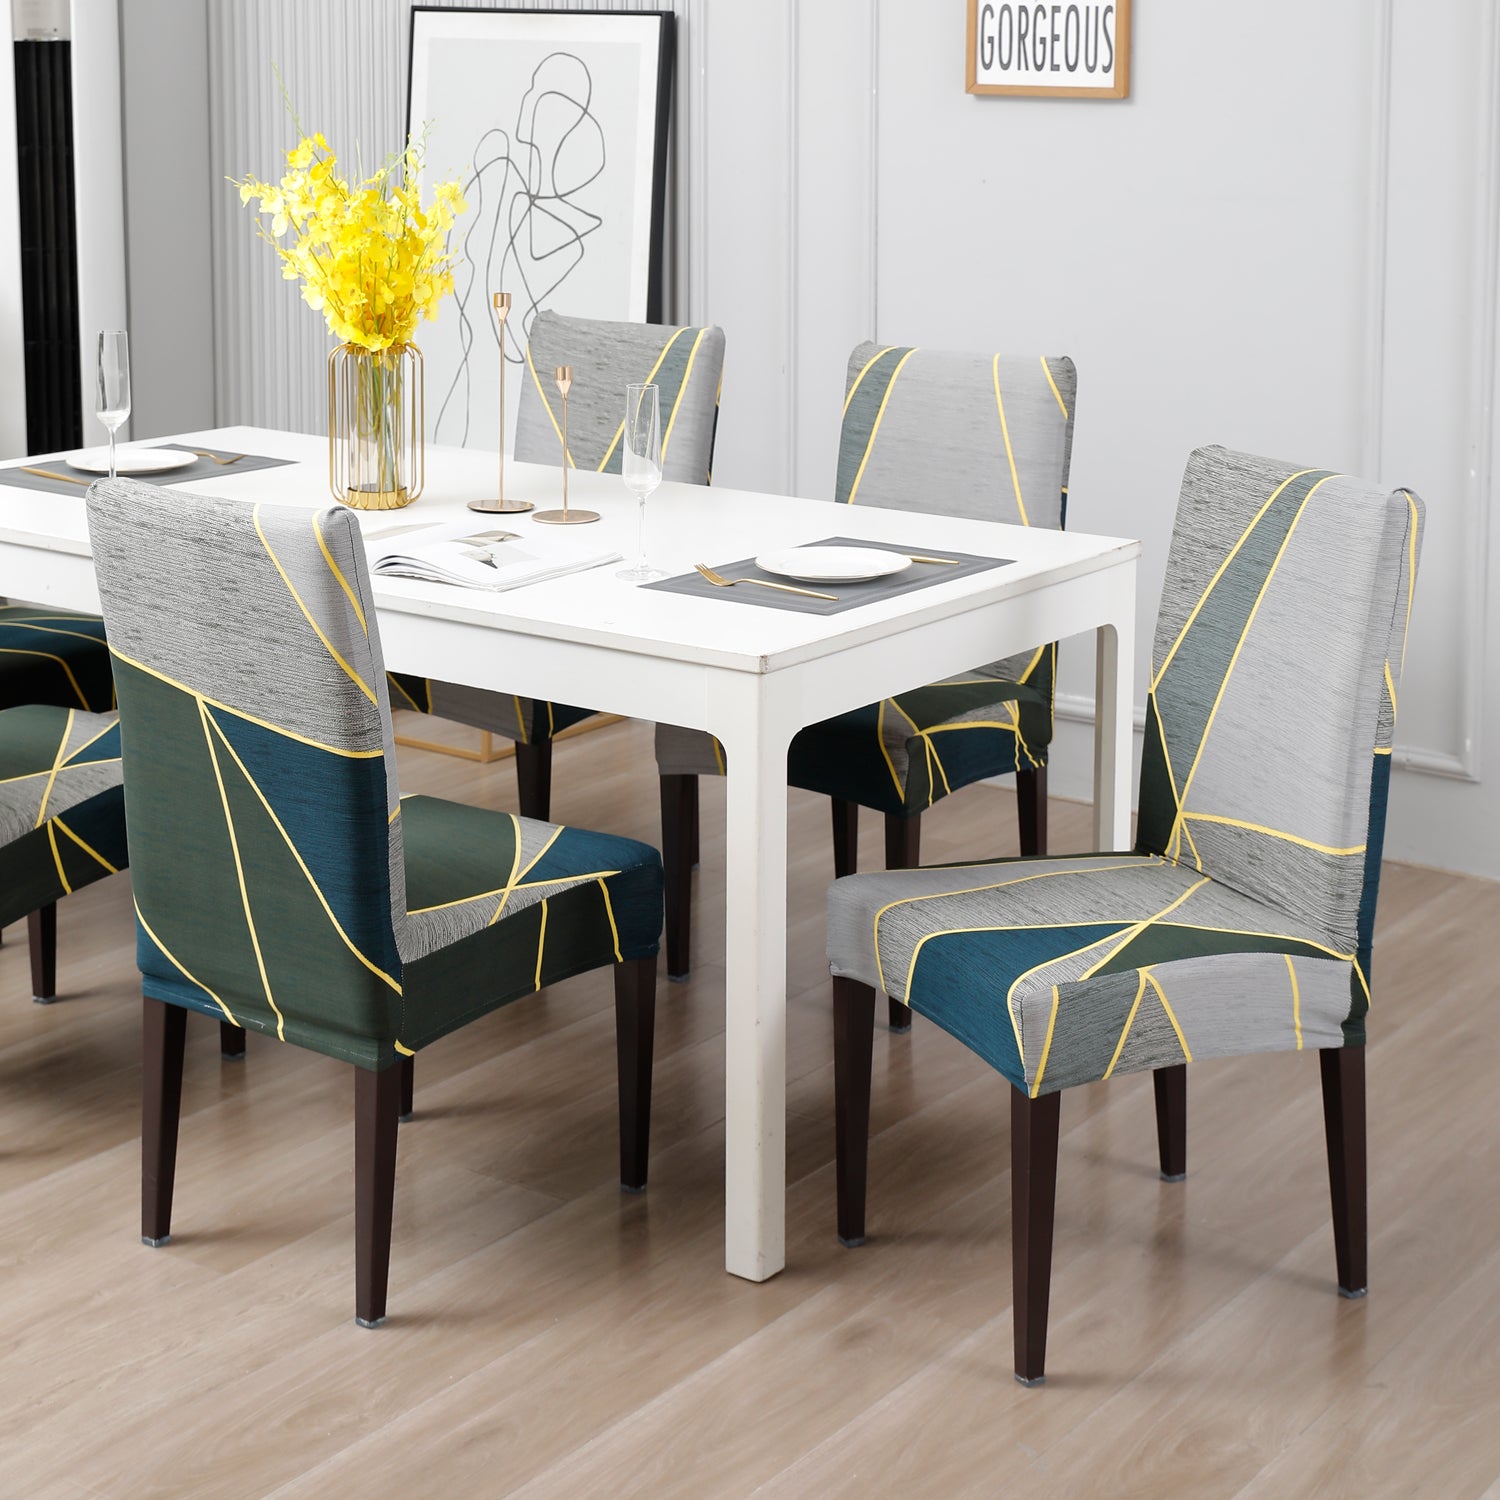 Elastic Stretchable Dining Chair Cover, Seaweed Geometric Abstract